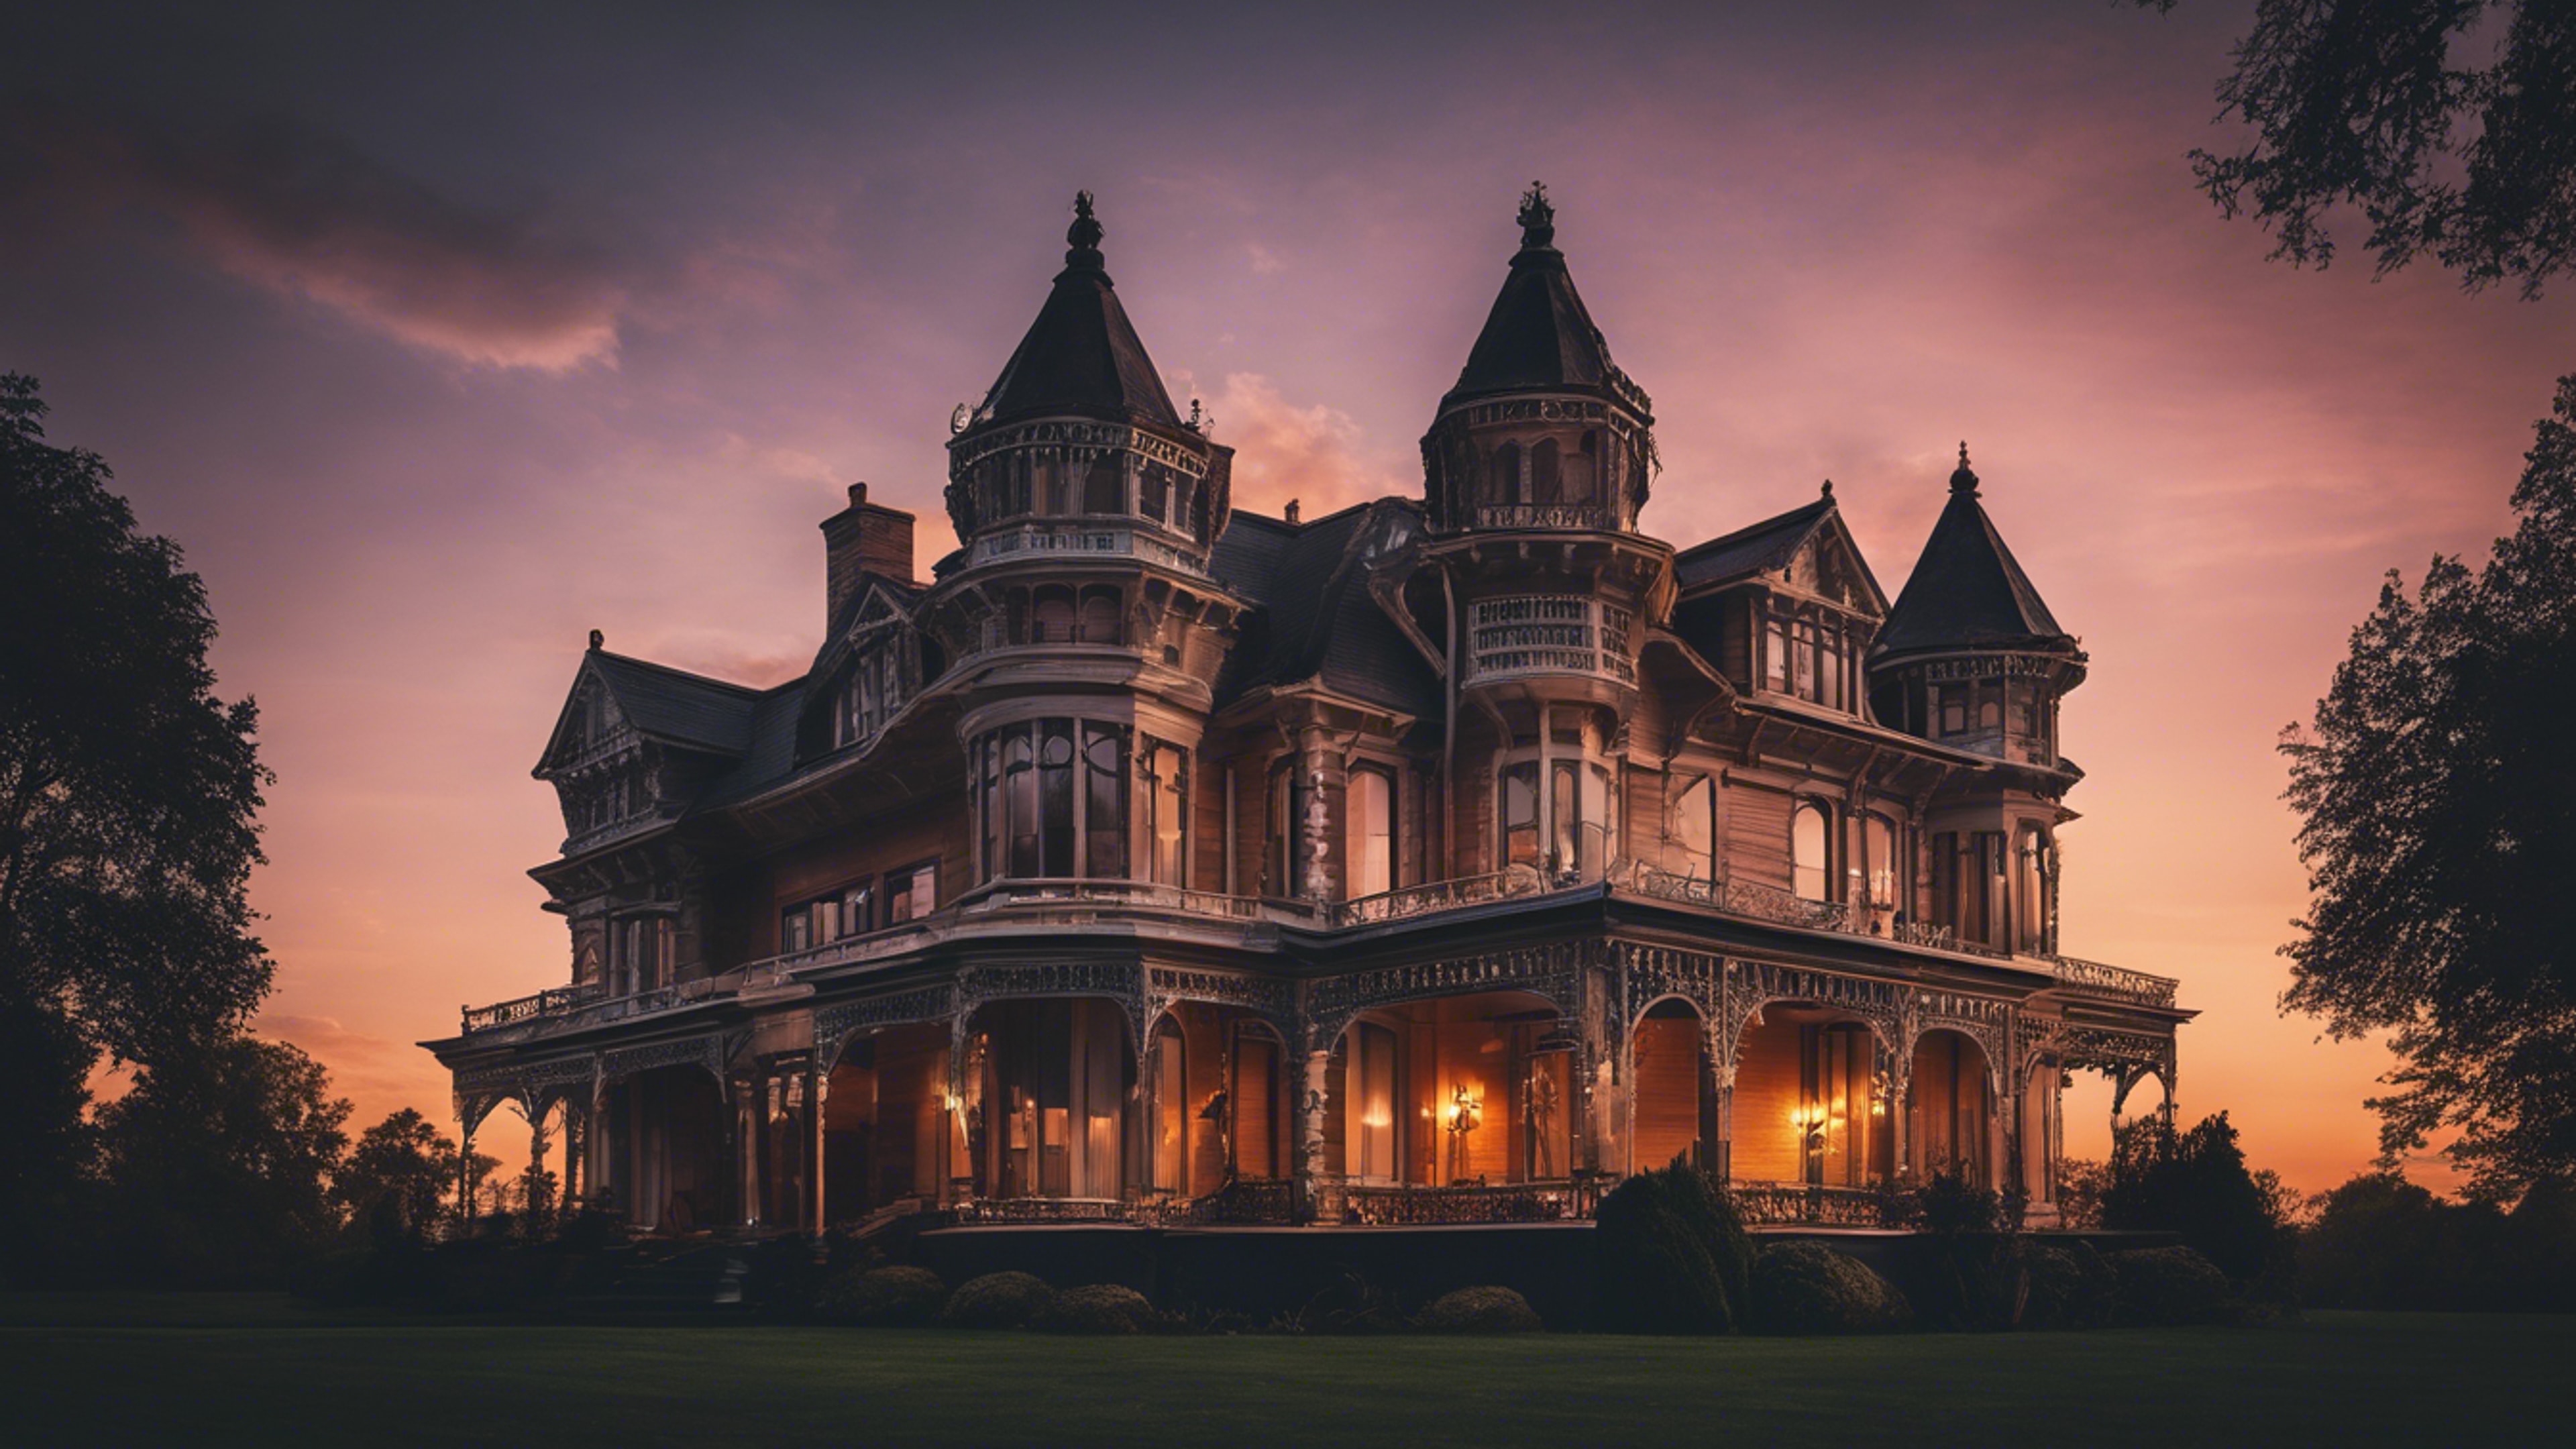 A grand Victorian mansion silhouetted by the warm lights of a beautiful sunset.壁紙[2ec34a3400fd4335b2a3]